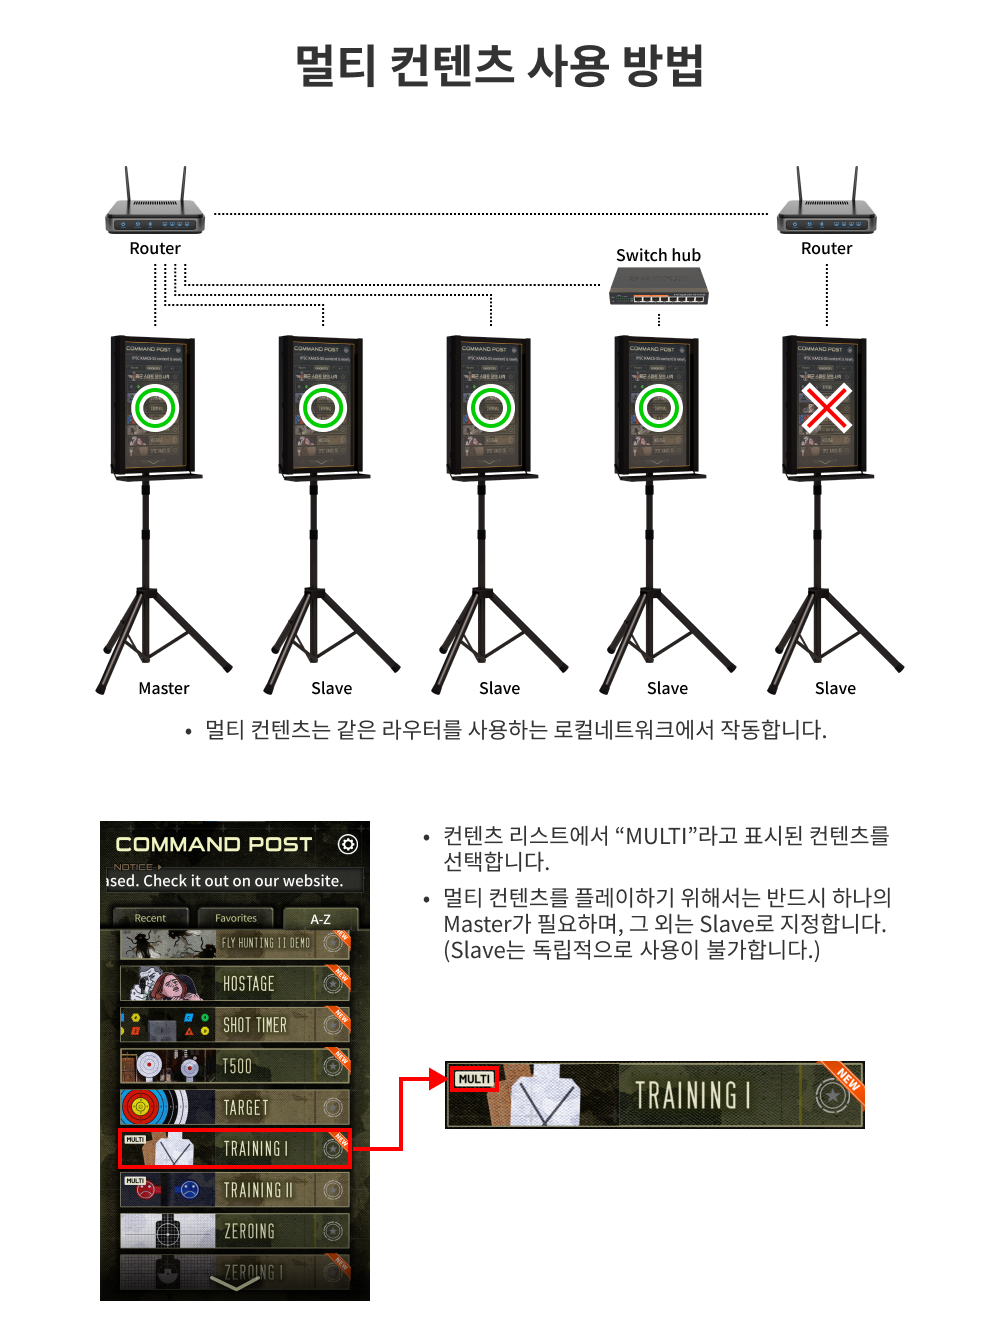 How to use multi content(Kor).jpg